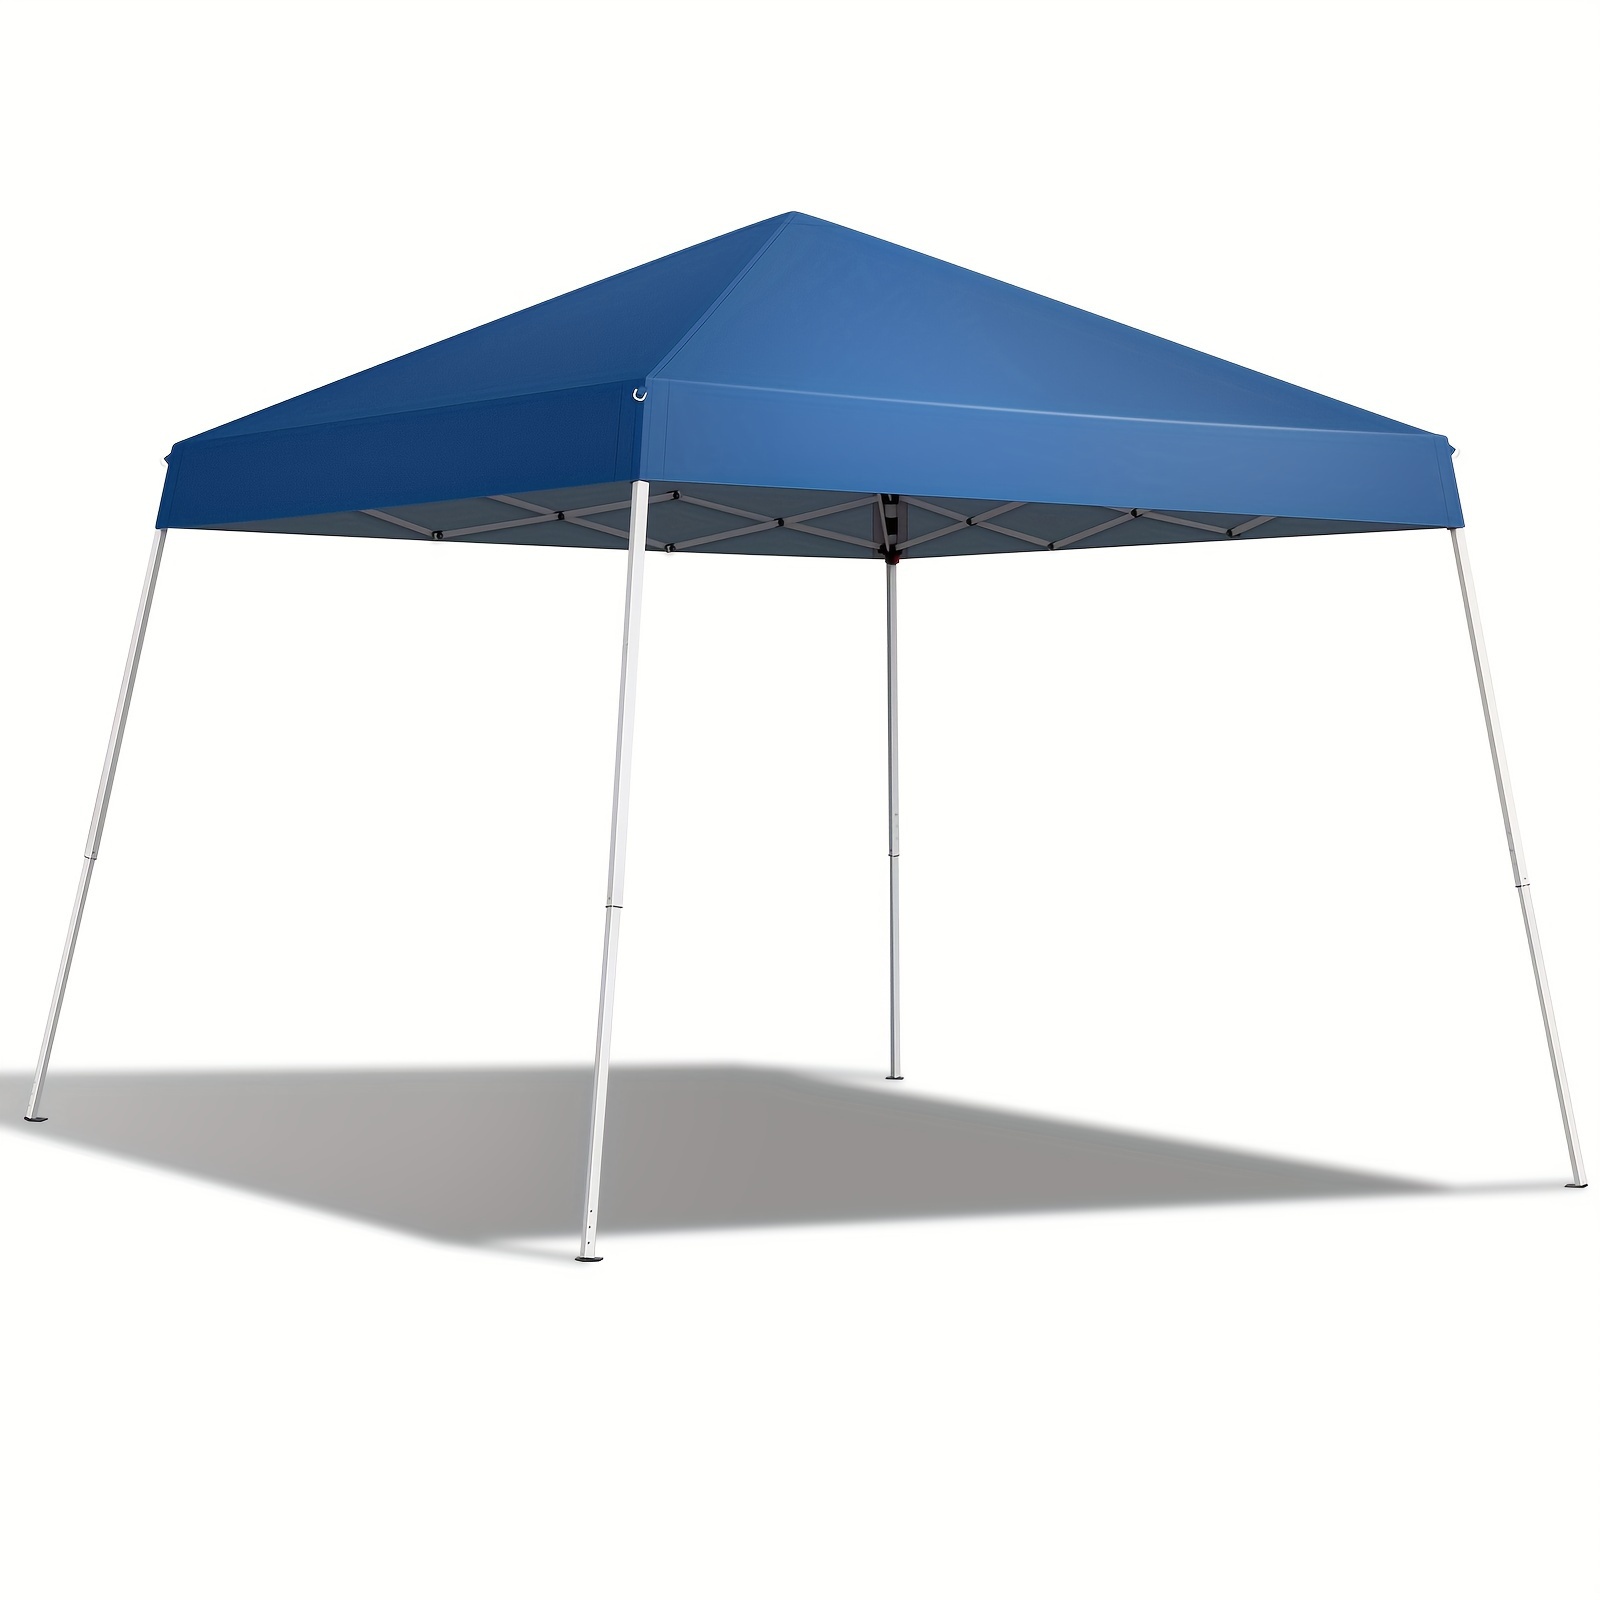 

3 X 3m Portable Home Use Waterproof Folding Tent